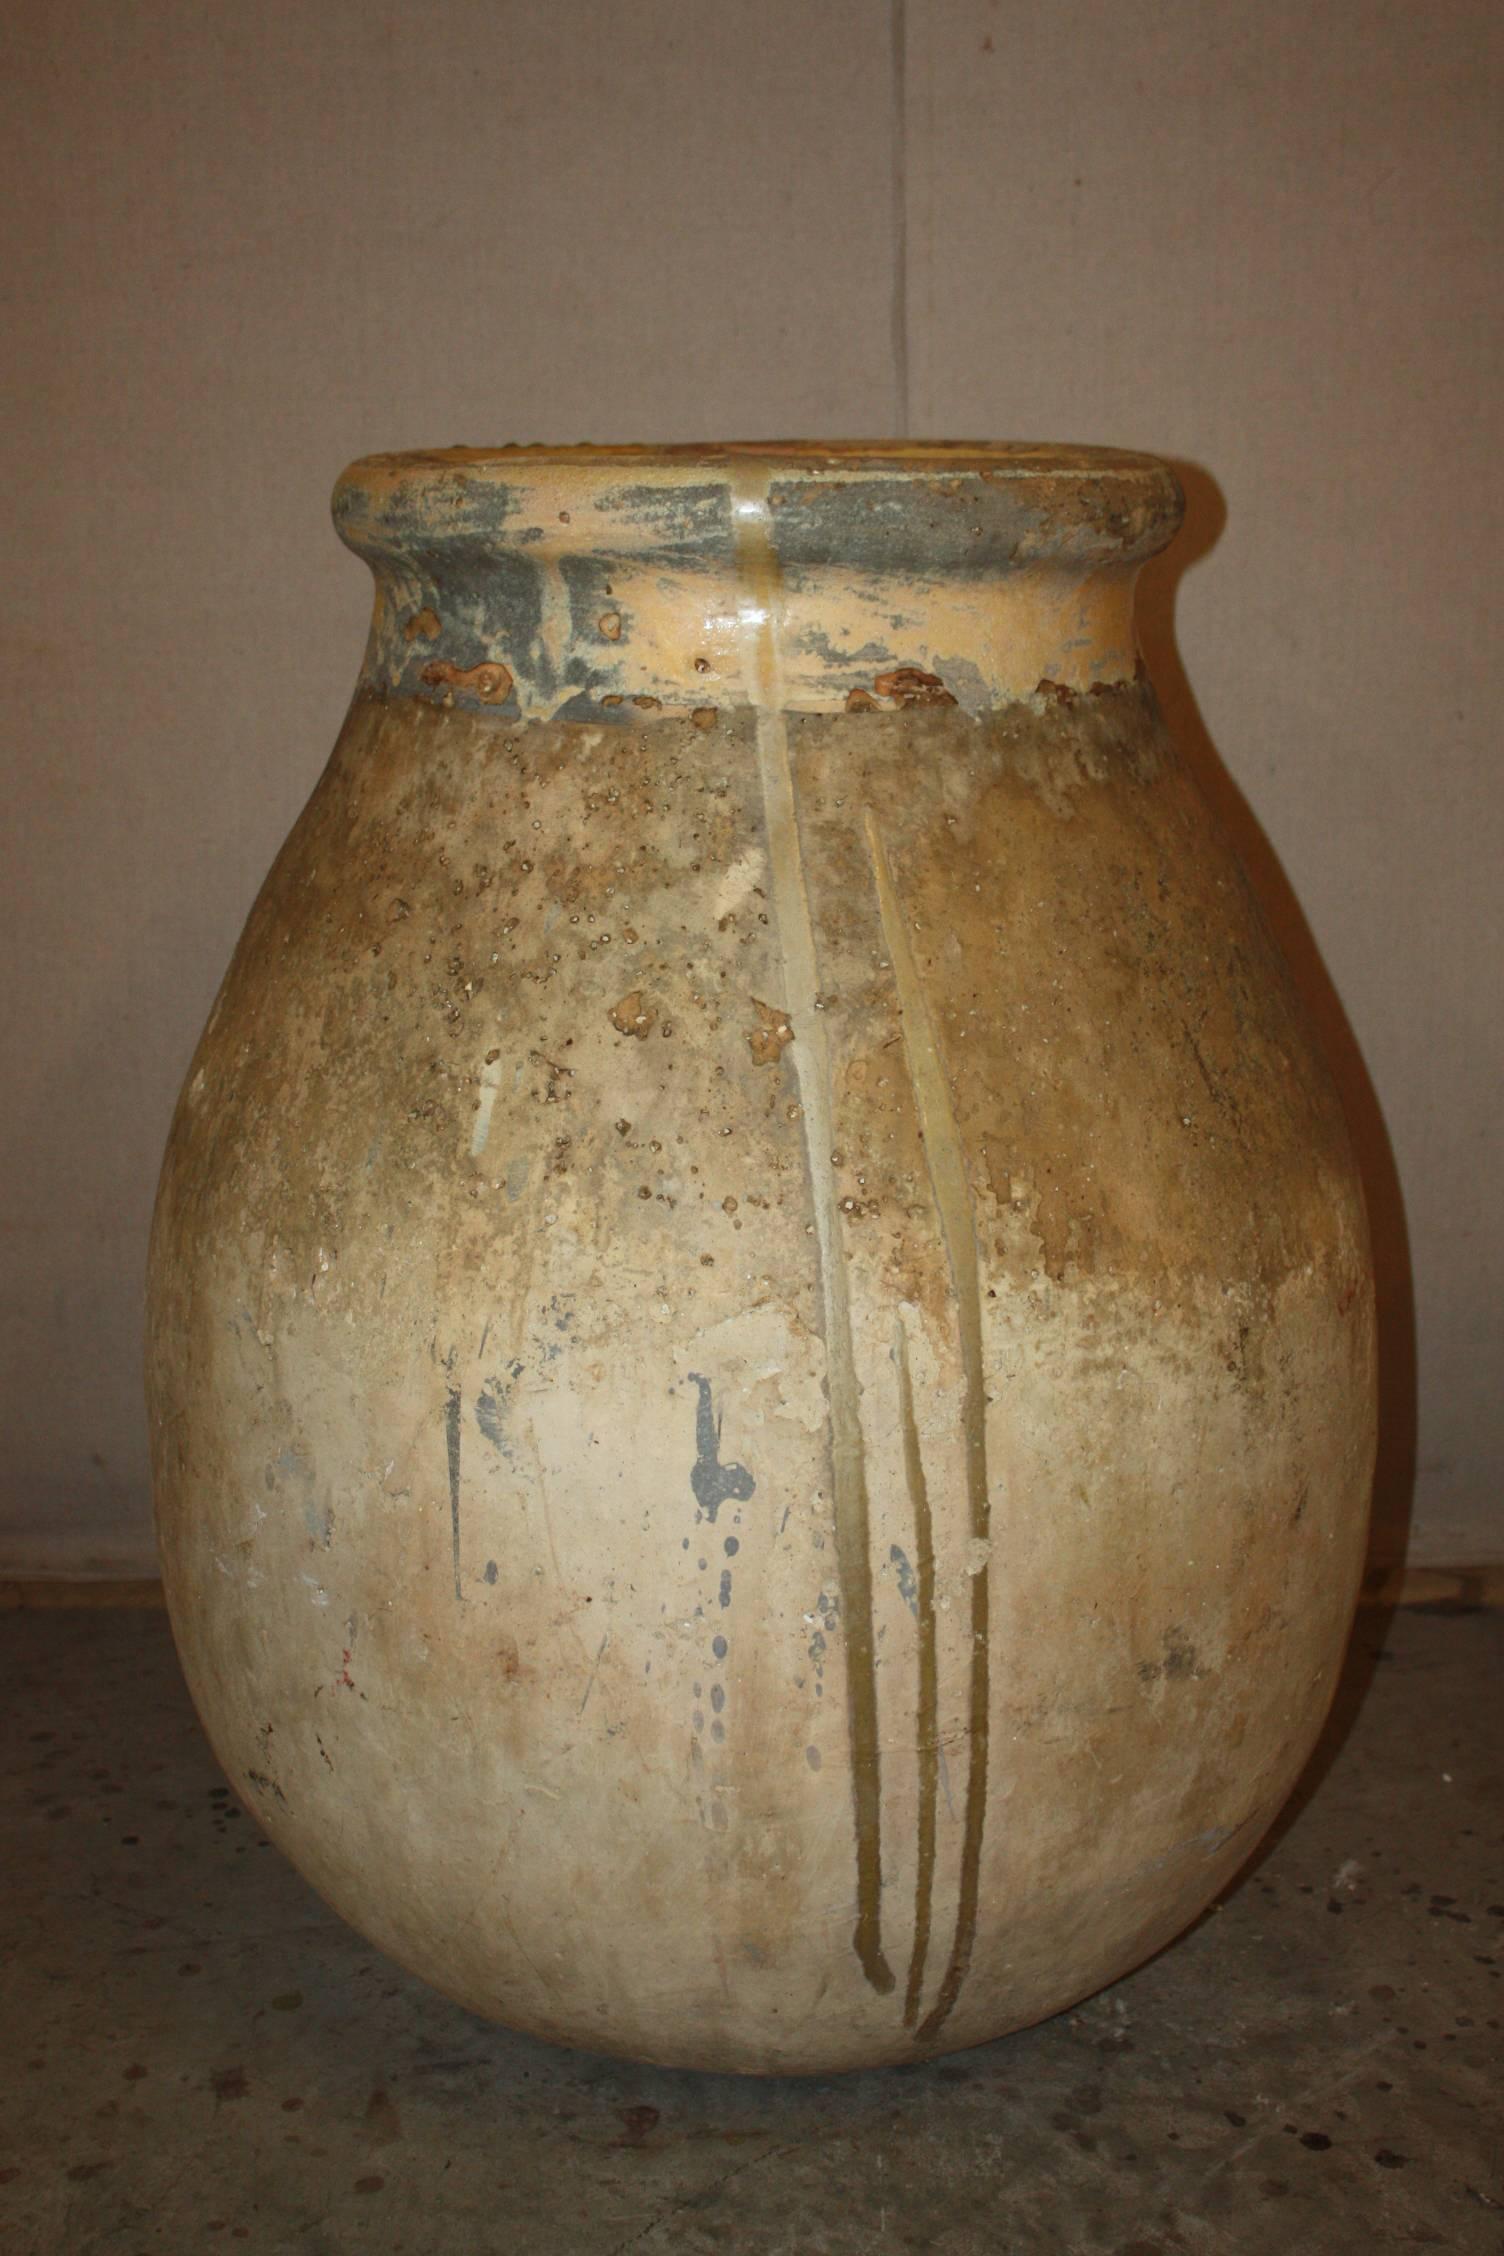 This is a great looking large French provincial olive jar from Biot, Provence. It dates to the early 1800s. It has a very attractive bulbous shape. It also has 